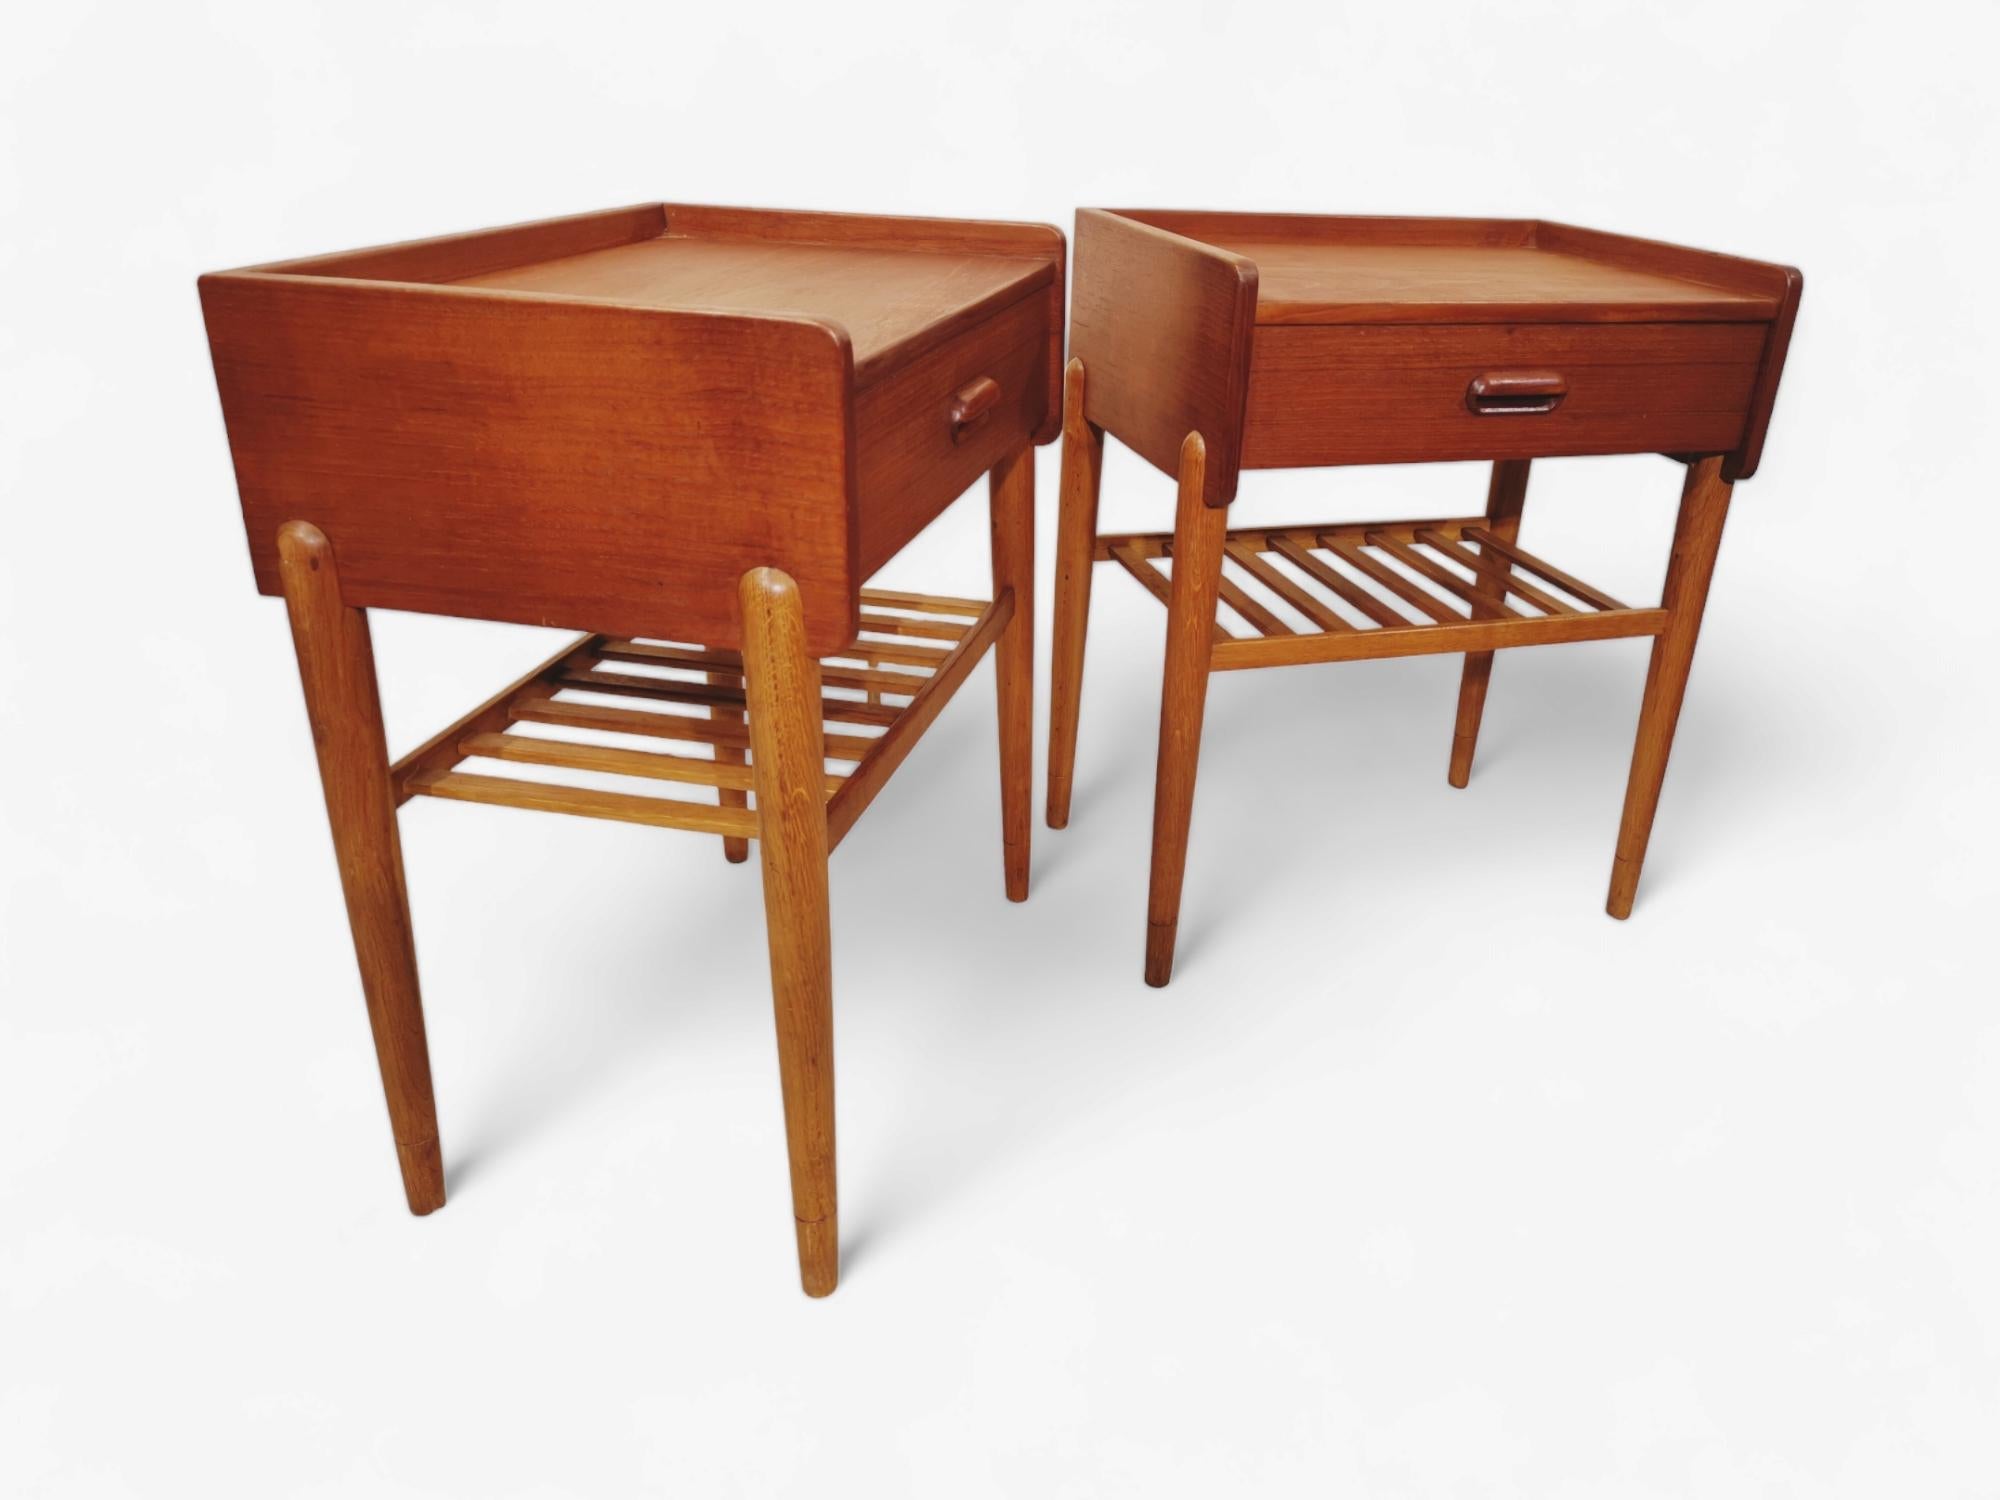 A rare pair of mid-century Danish teak nightstands, by Omann Junior Model No 50.
Classic Danish Nightstands From the 60s, With one drawer in each nightstand,  so you can store away, and keep your space organized and clutter-free.
These Danish